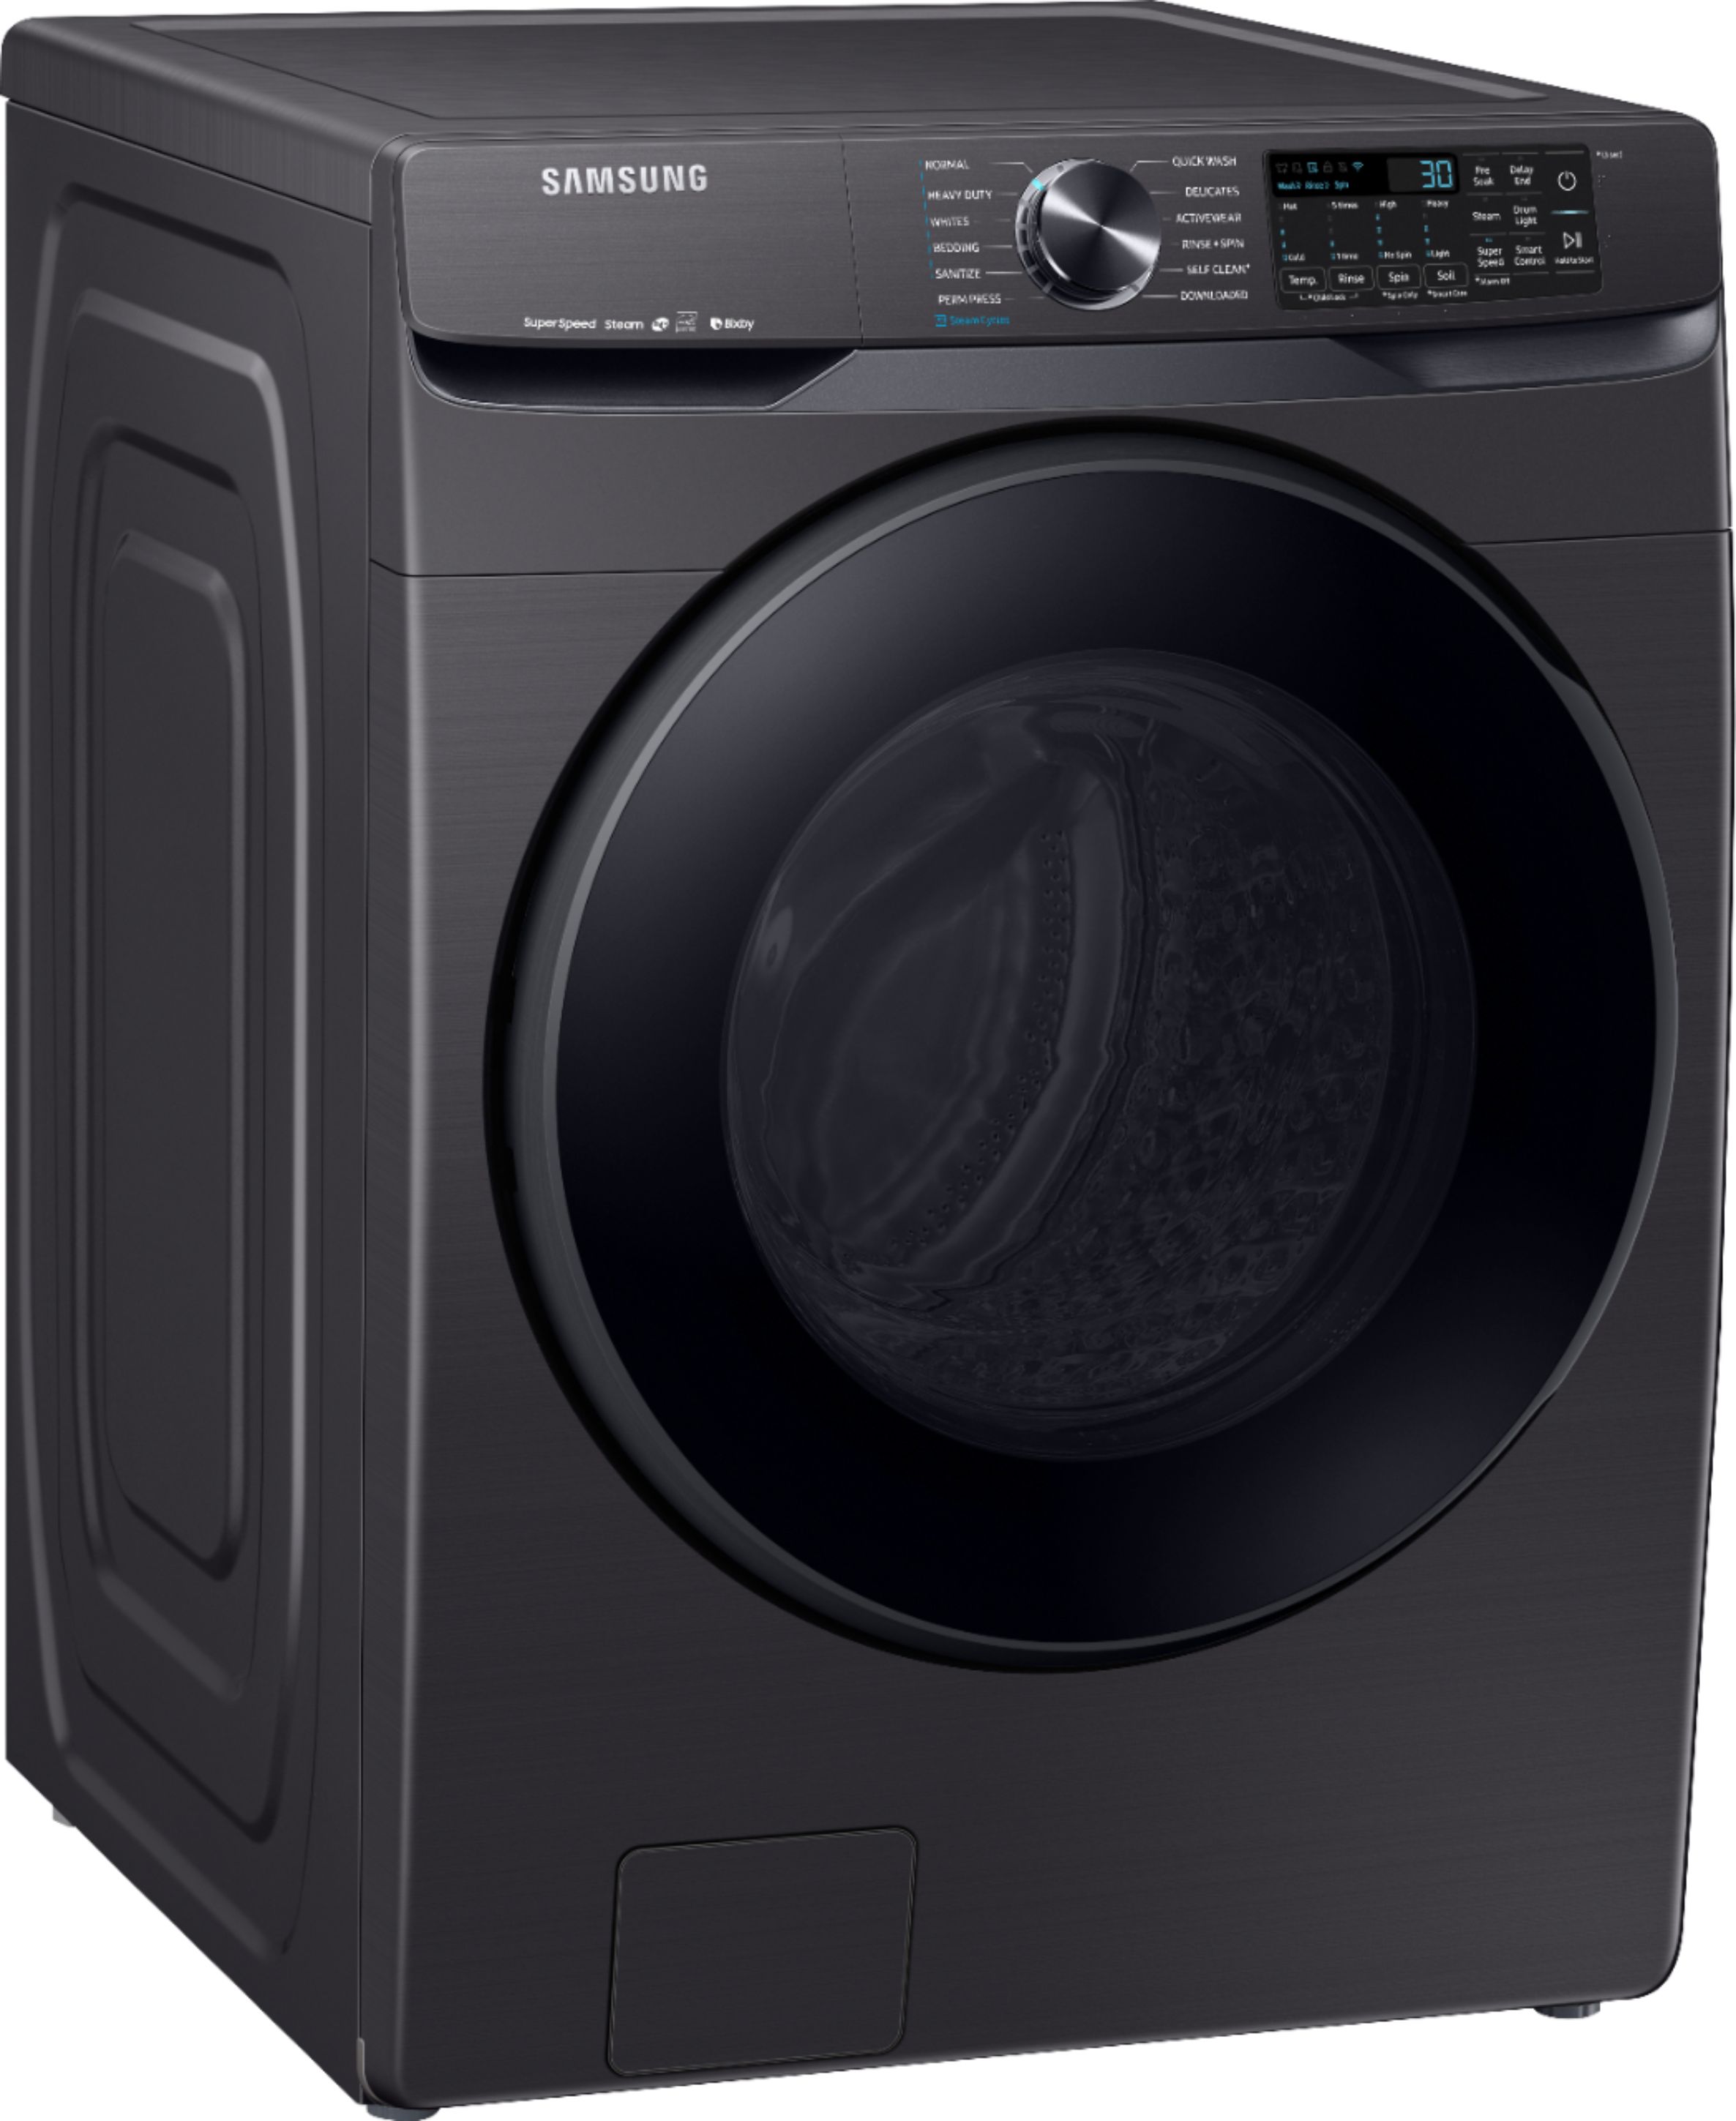 Angle View: Samsung - 5.0 Cu. Ft. High Efficiency Stackable Smart Front Load Washer Steam and CleanGuard - Brushed black